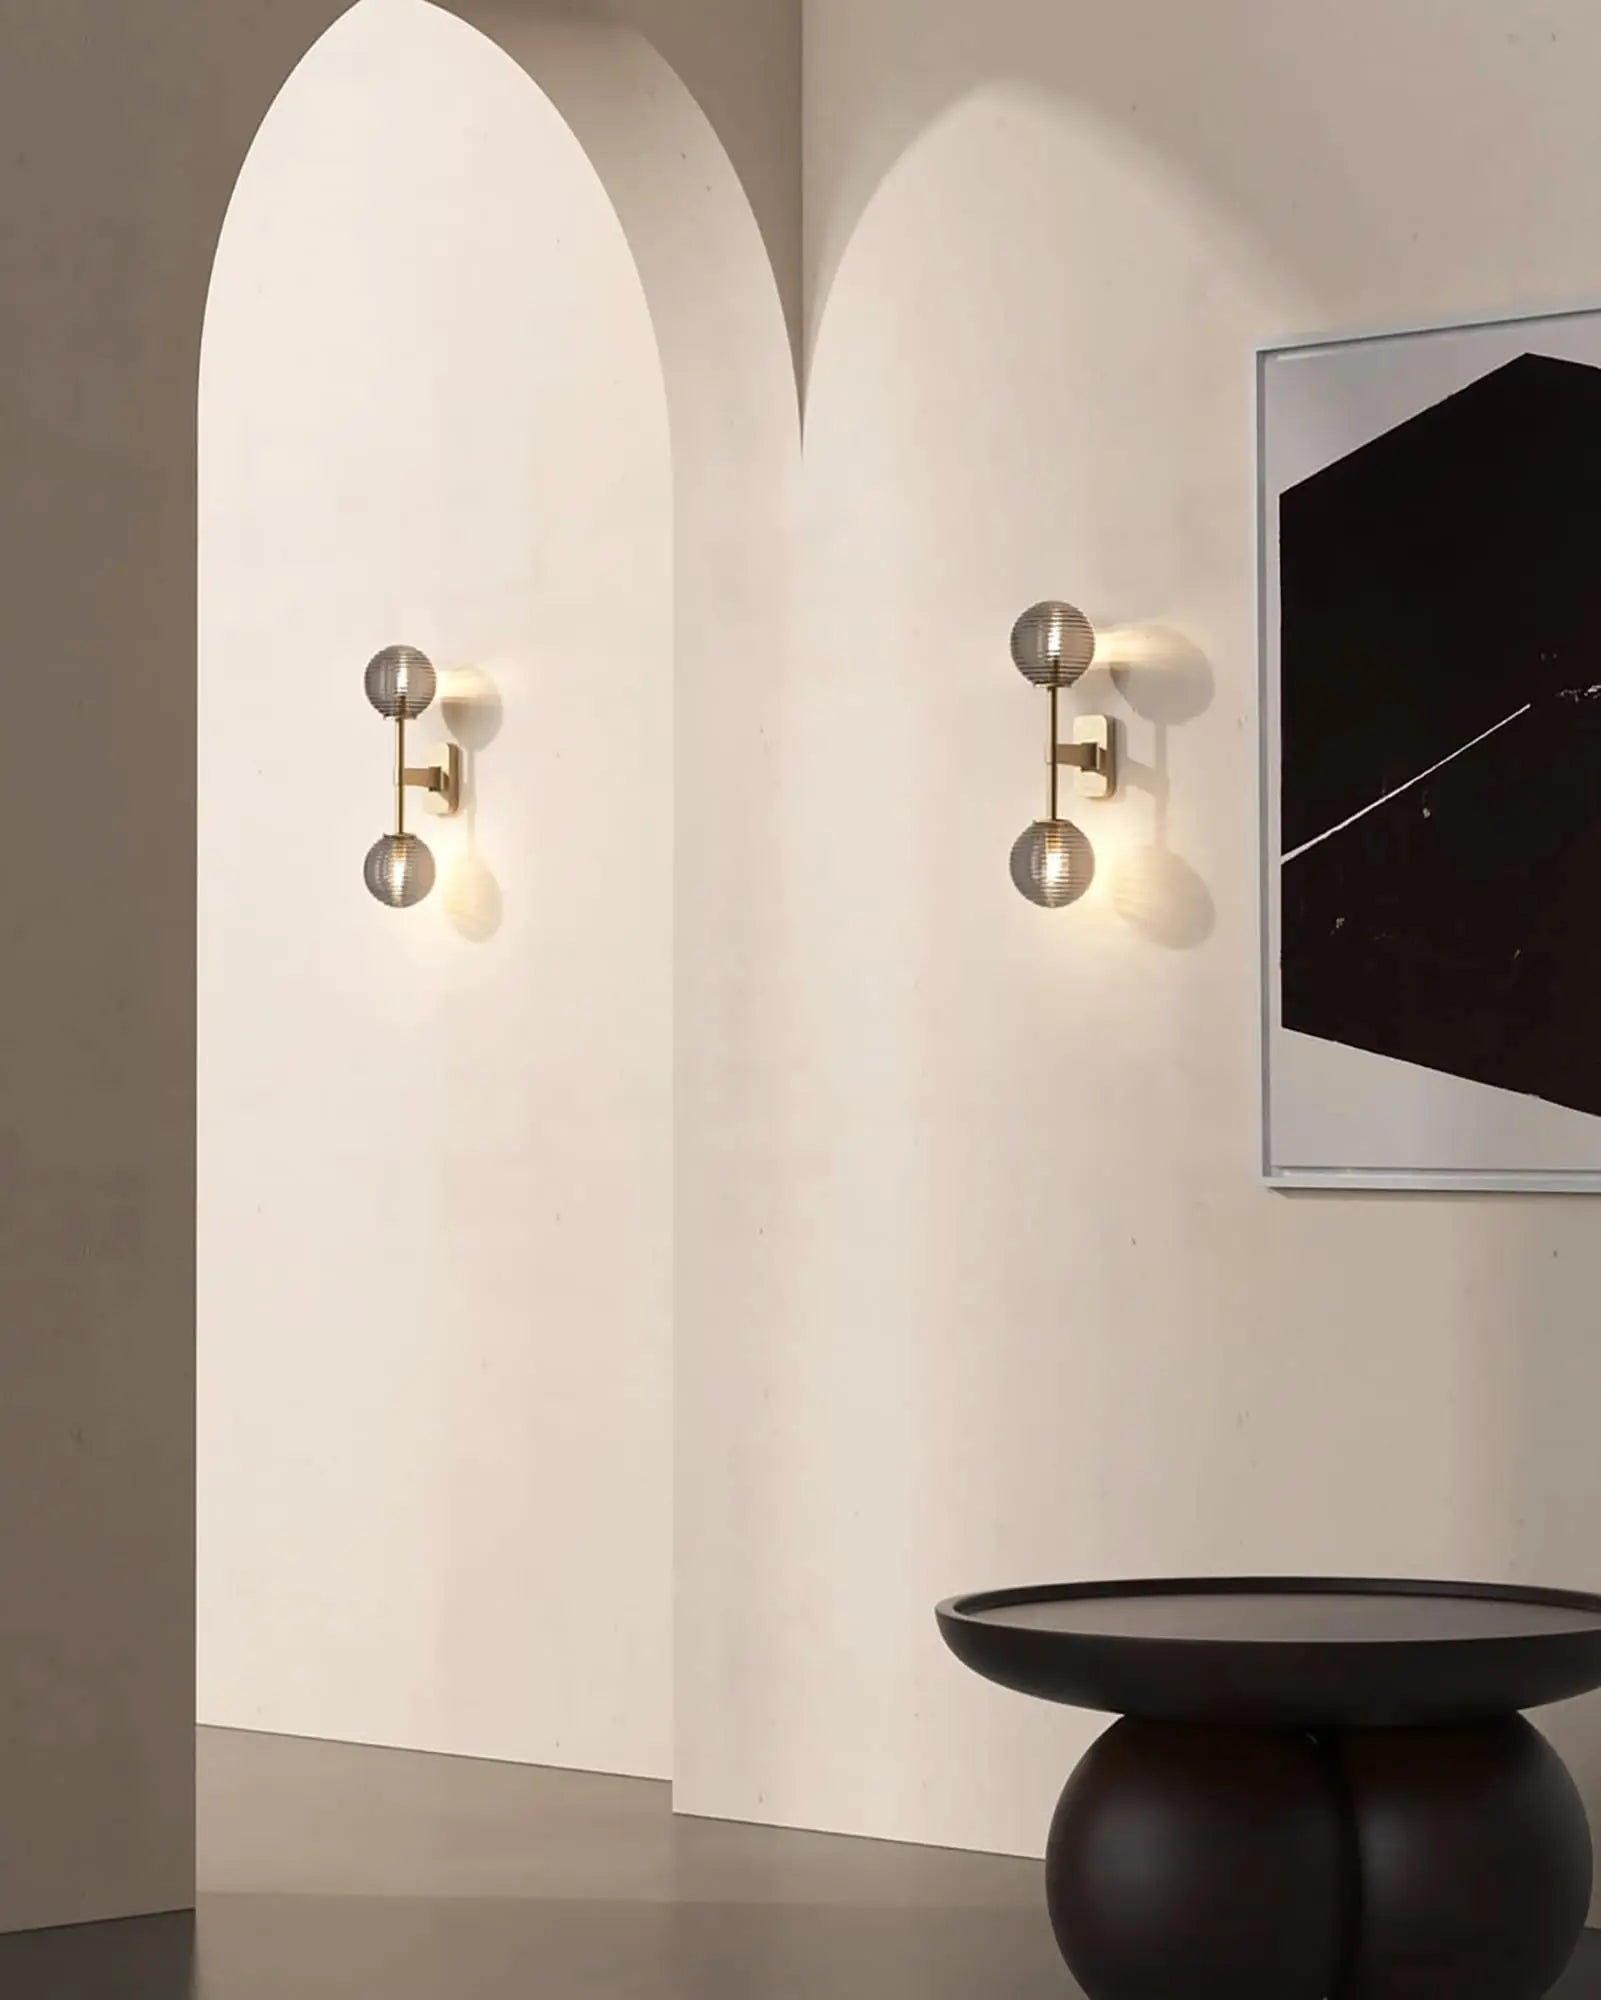 Tacoma twin classic double orb wall light in a hallway under an arch